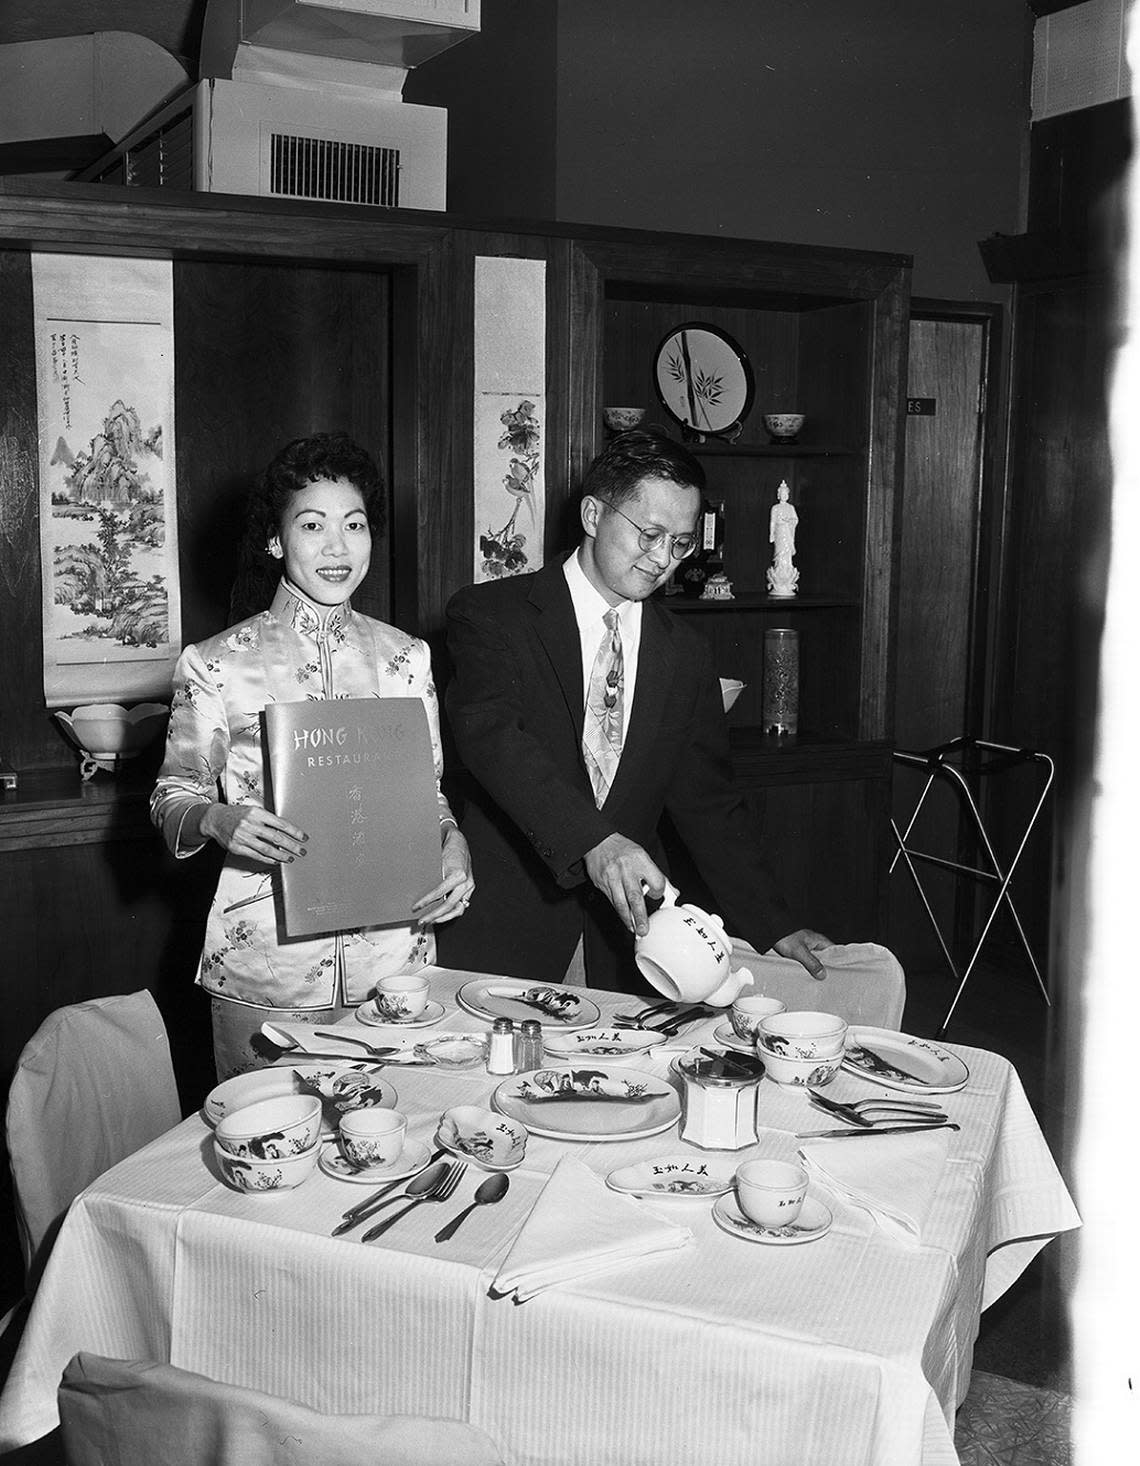 March 26, 1959: Walter and Frances Eng, opening their Hong Kong Restaurant on Blue Bonnet Circle off South University Drive in Fort Worth. Walter, who was born in Canton, China, came to Fort Worth in 1932. The restaurant business ran in his family. Fort Worth Star-Telegram archive/UT Arlington Special Collections